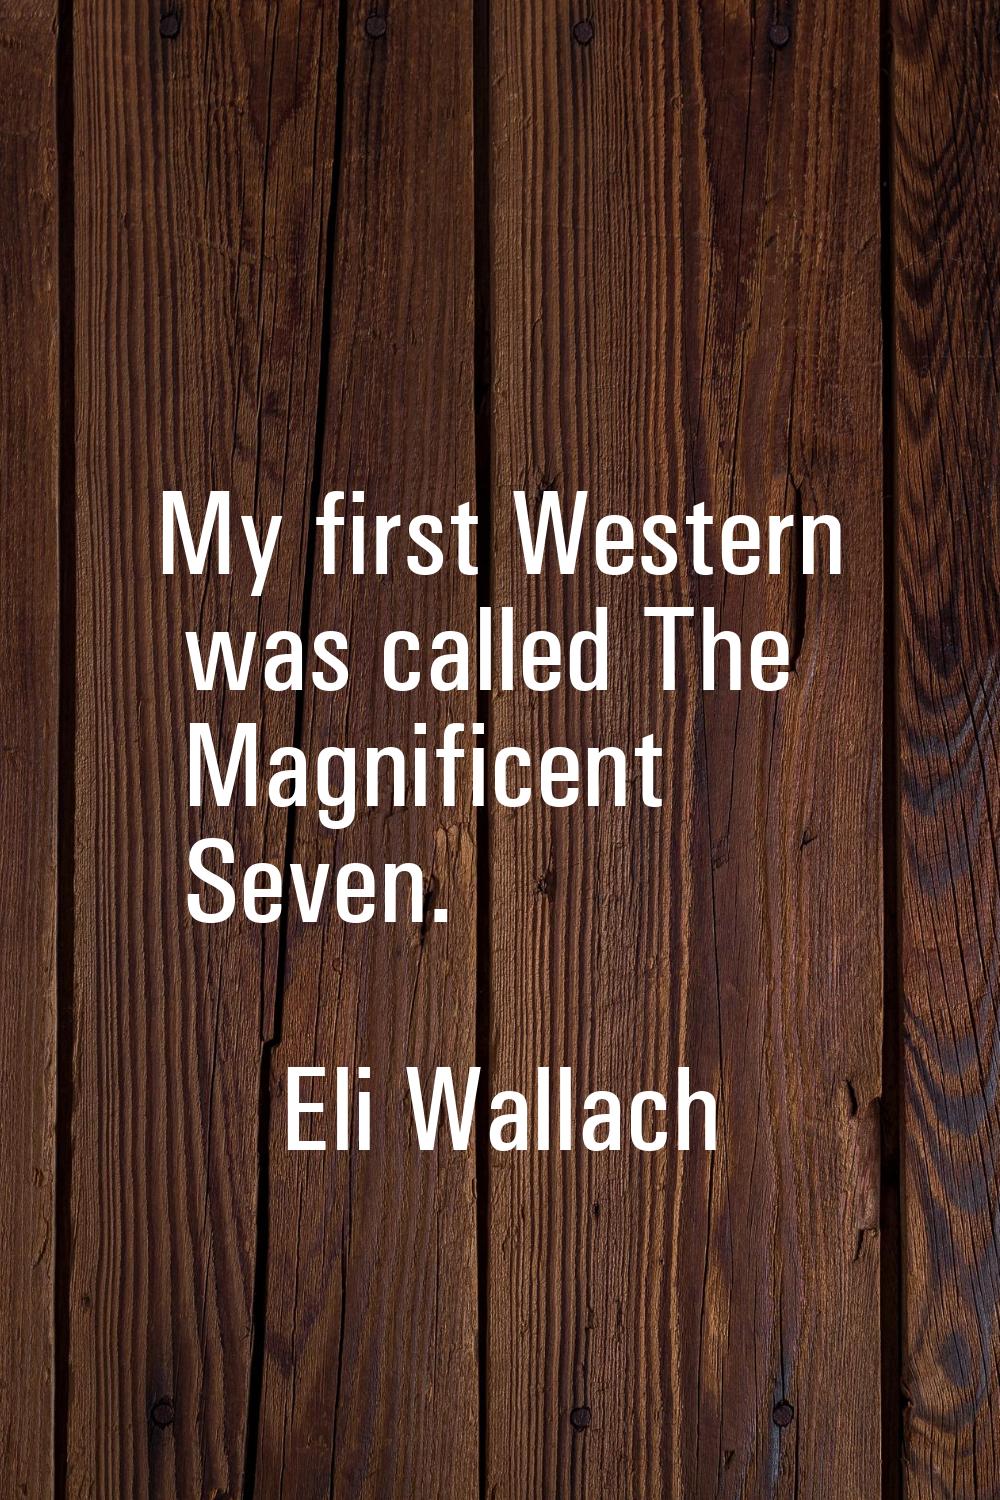 My first Western was called The Magnificent Seven.